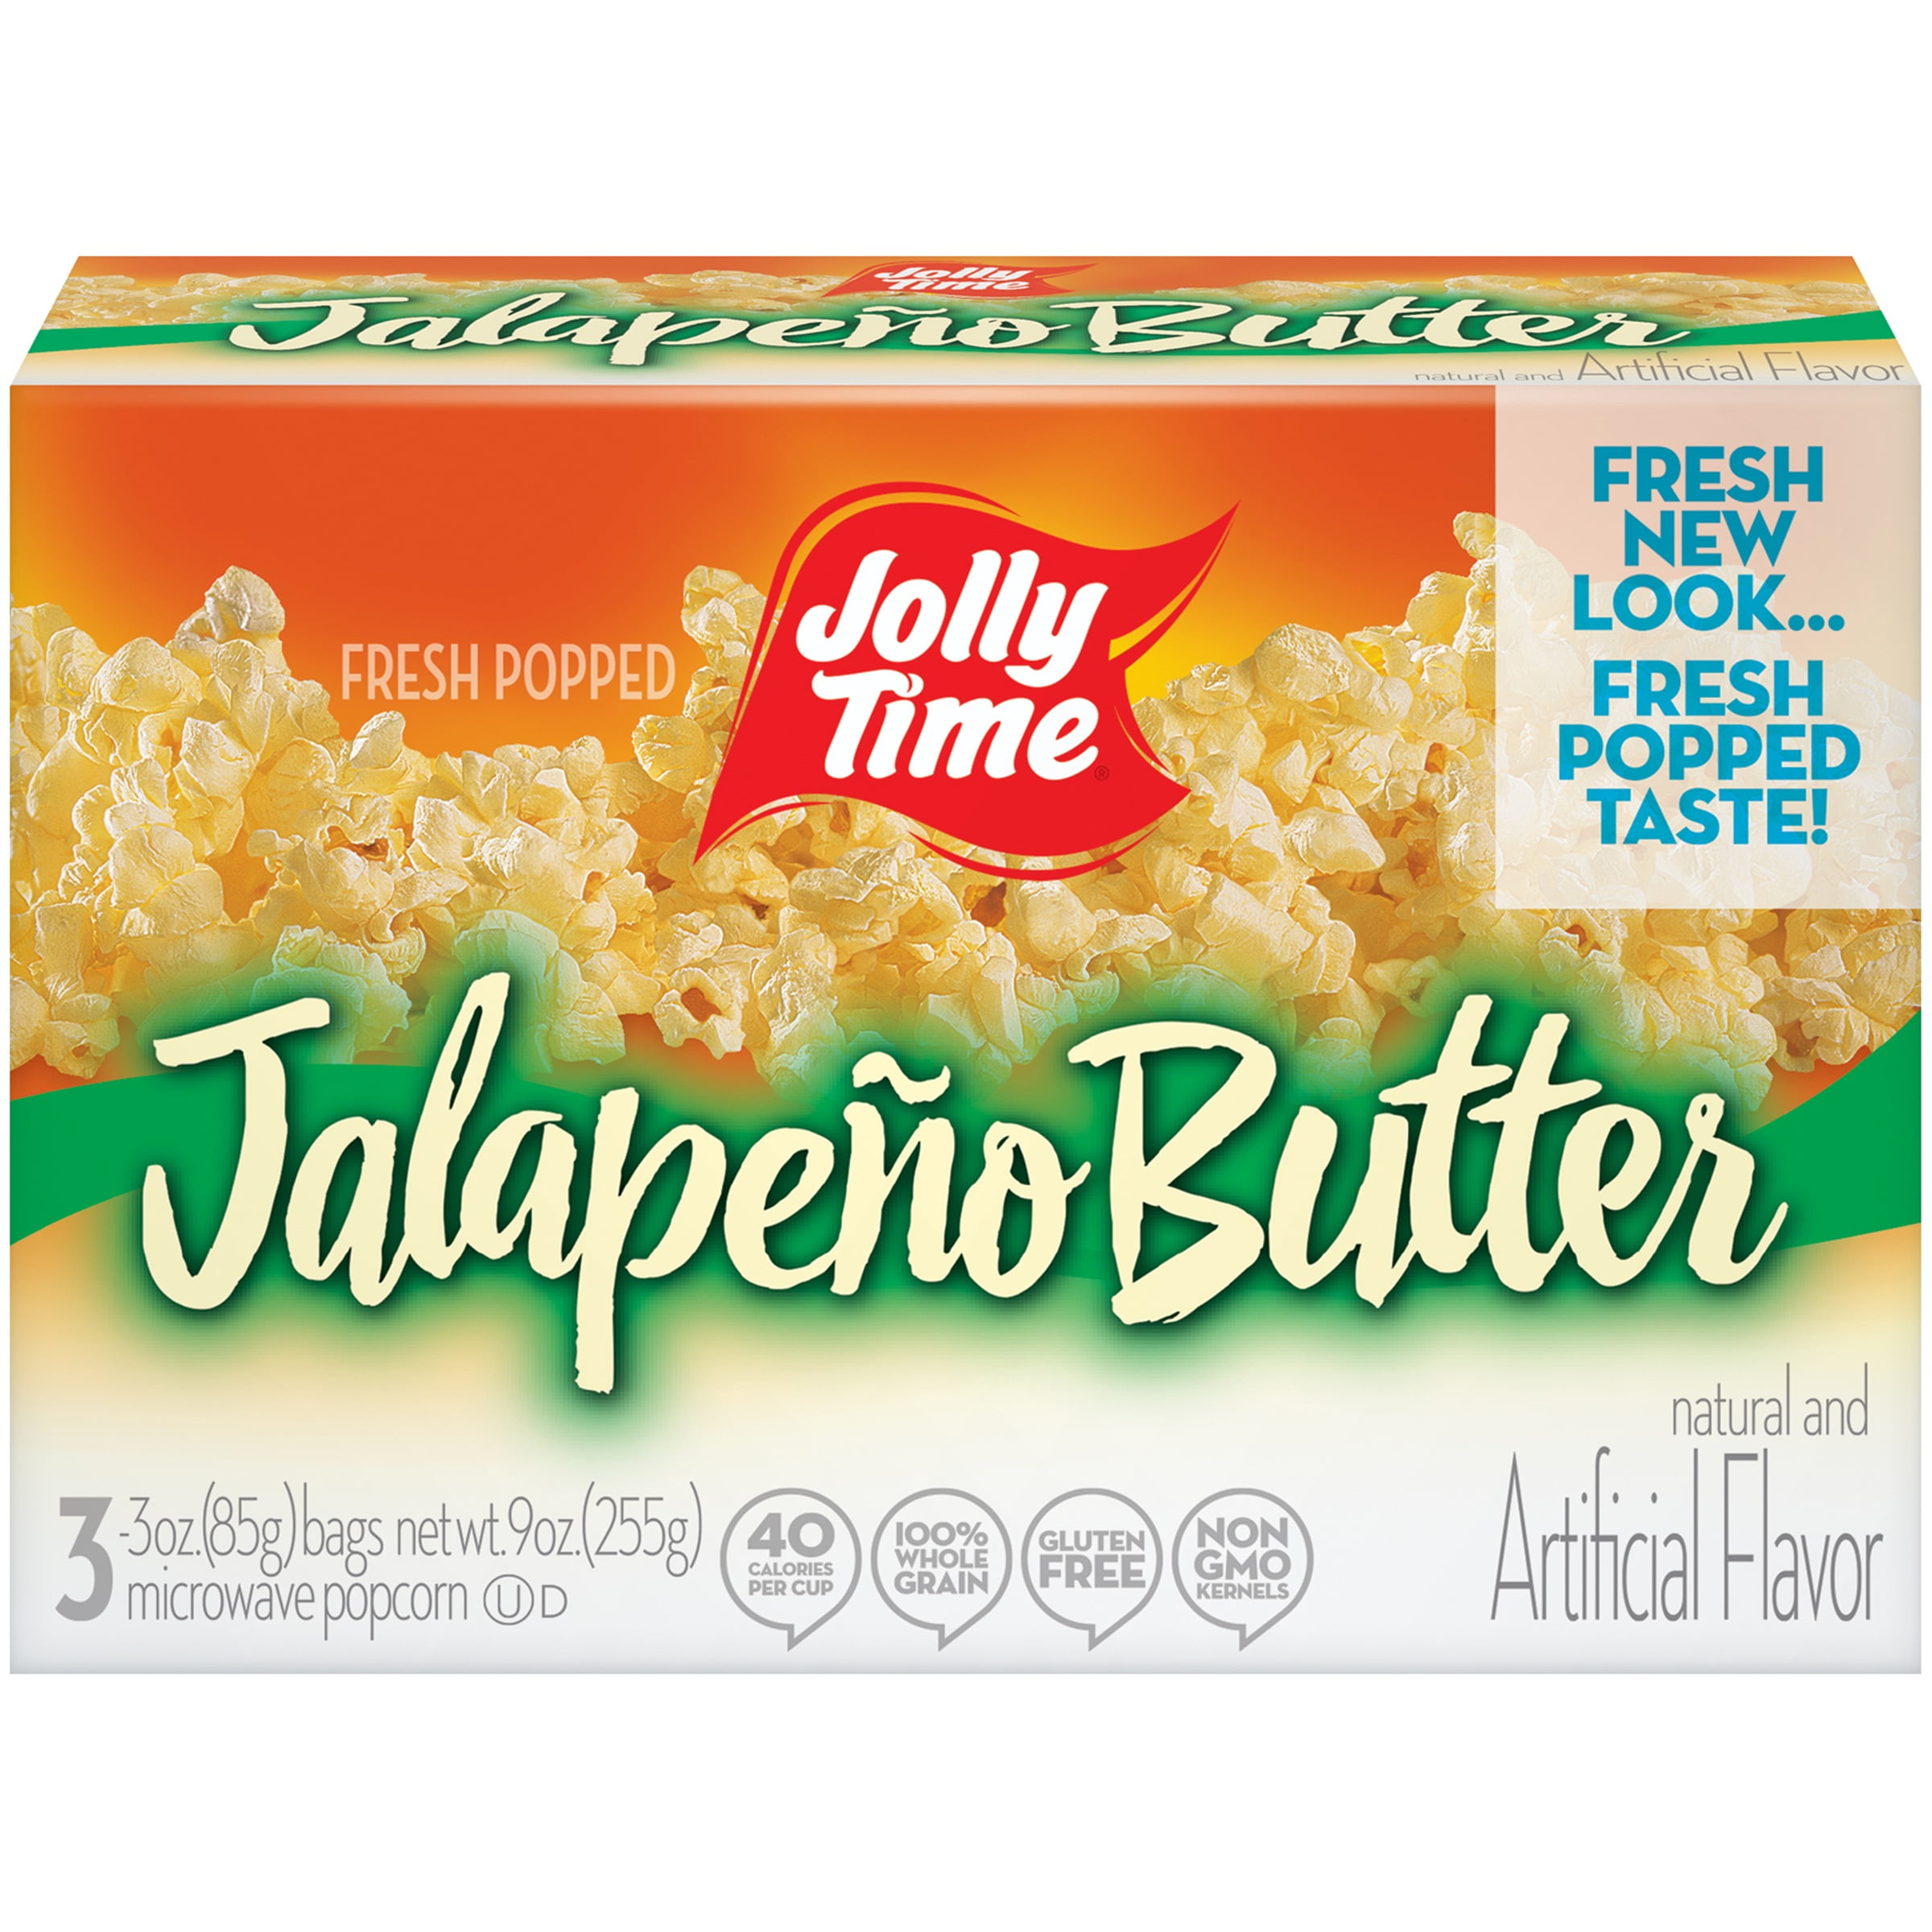 Jolly Time Jalapeno Butter Microwave Popcorn Bags, 3 Oz., 3 Count